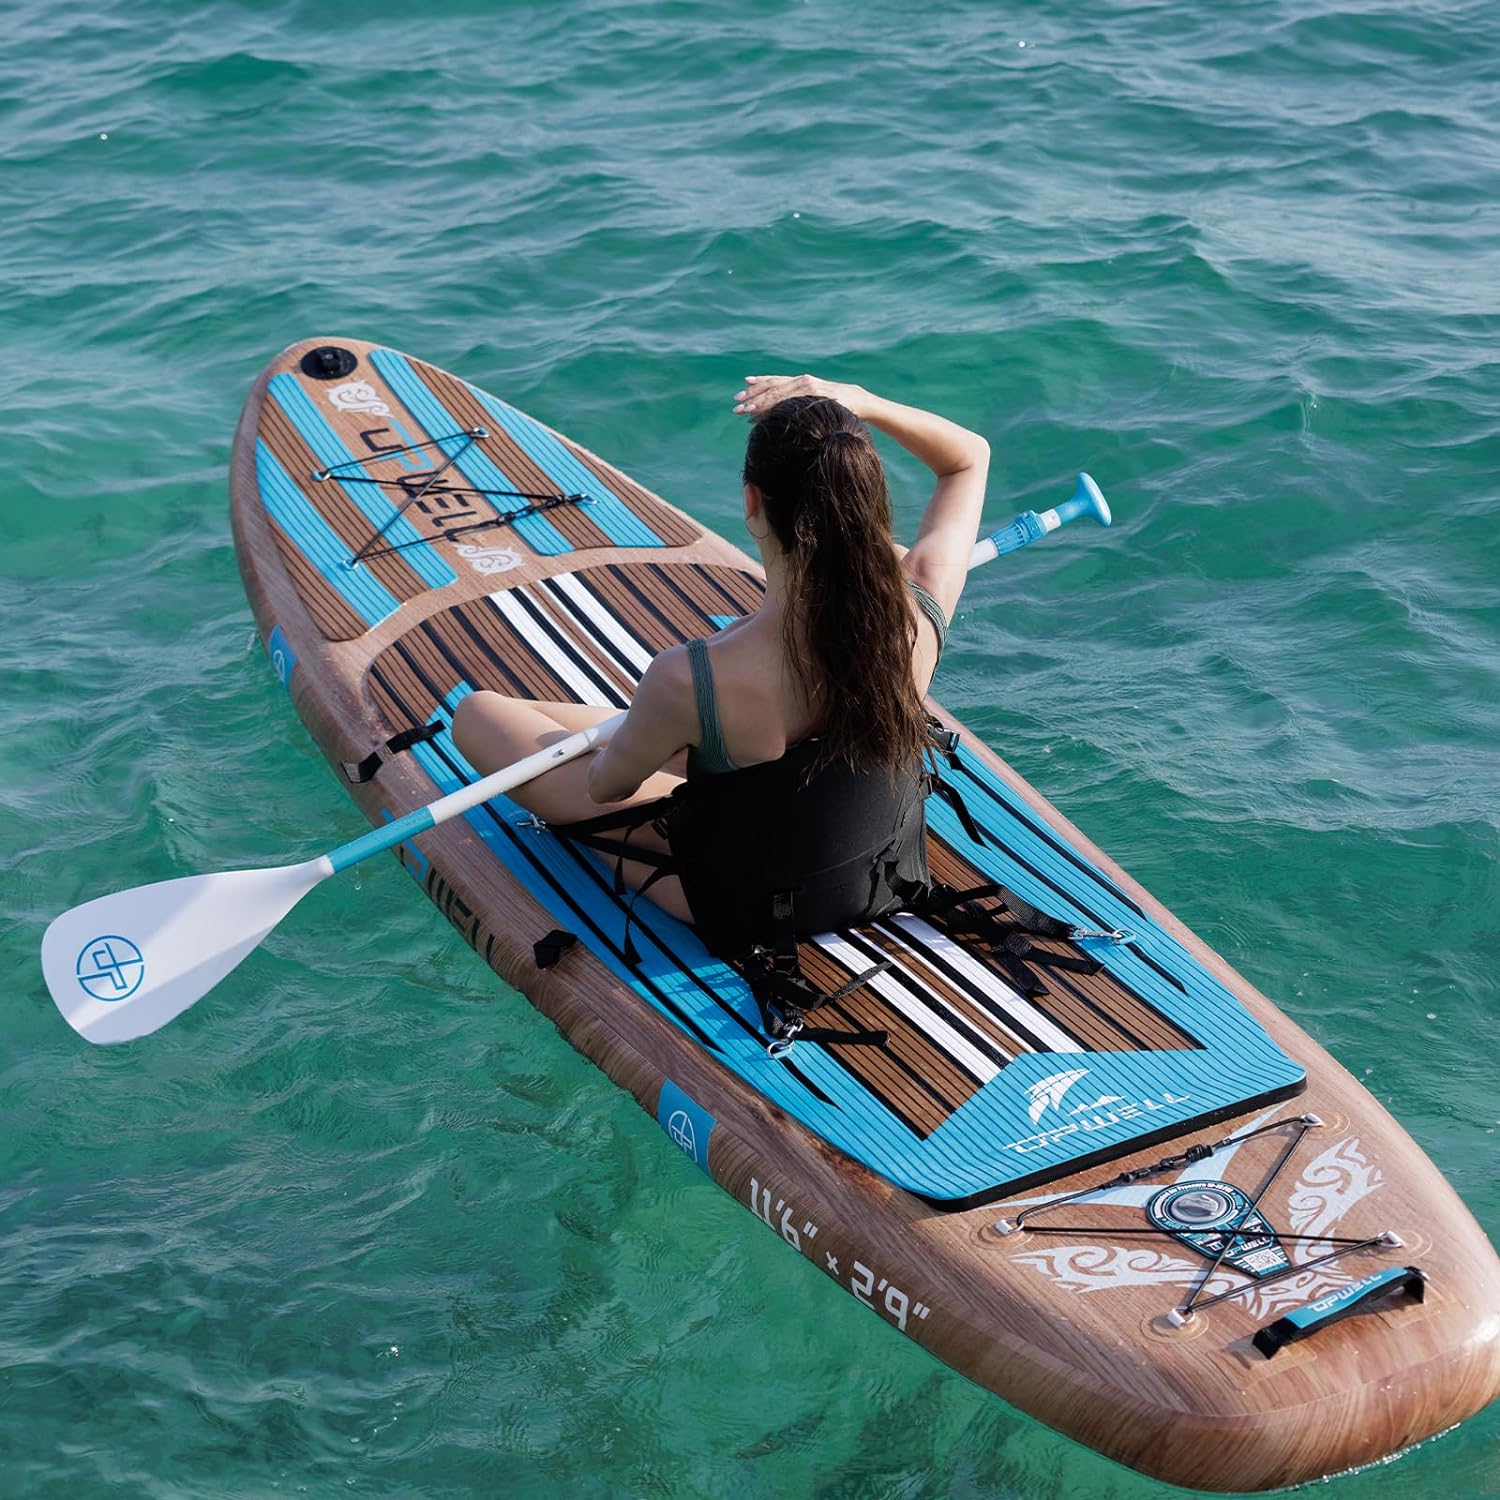 UPWELL Inflatable Paddle Board Seat - Kayak Seats With Back Support Stand Up Canoe Sup Boards For Adults Boat Fishing Accessories Wave001 - UPWELL Inflatable Paddle Board Seat Review